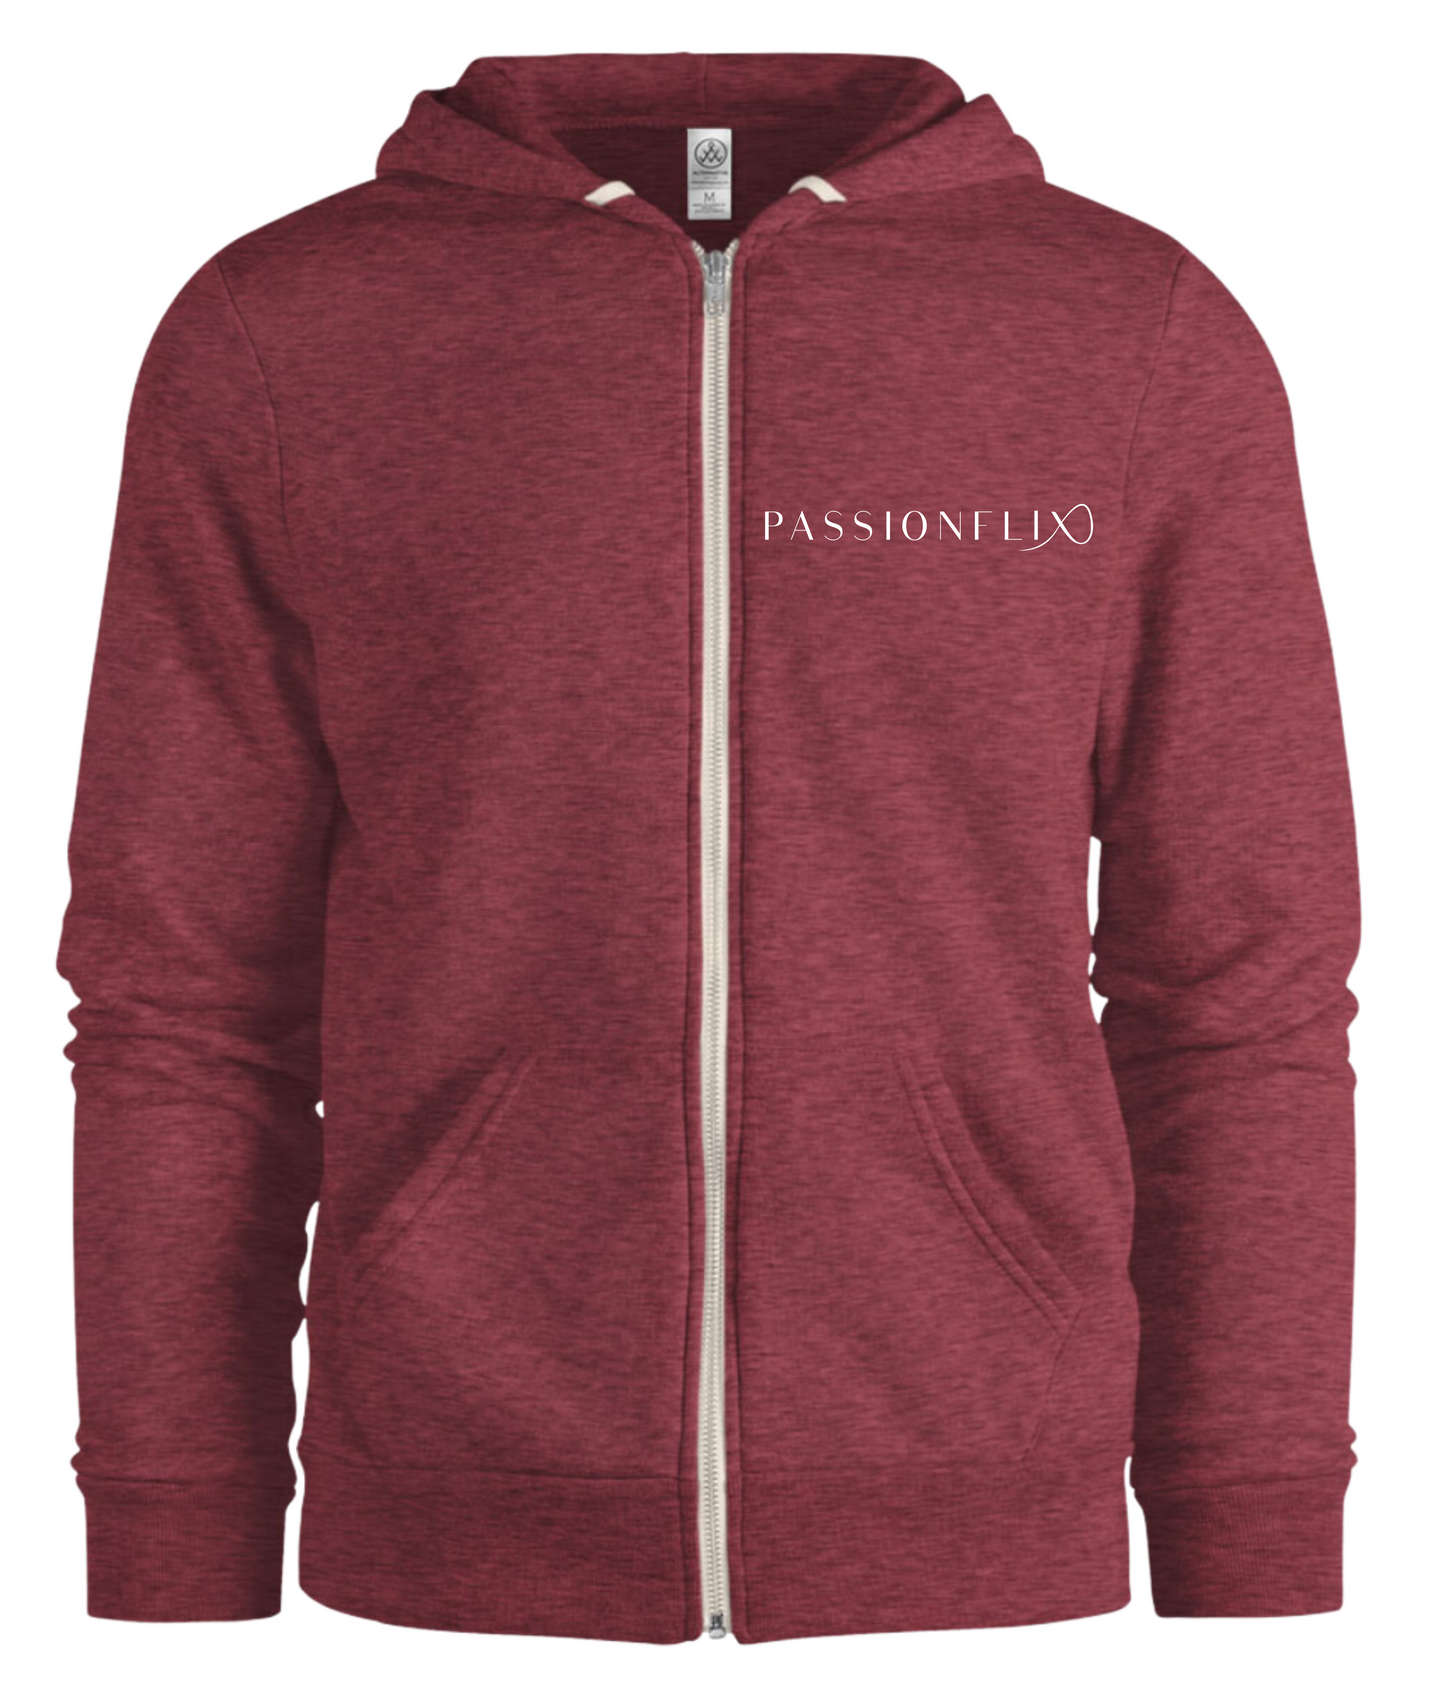 Passionflix Hoodie